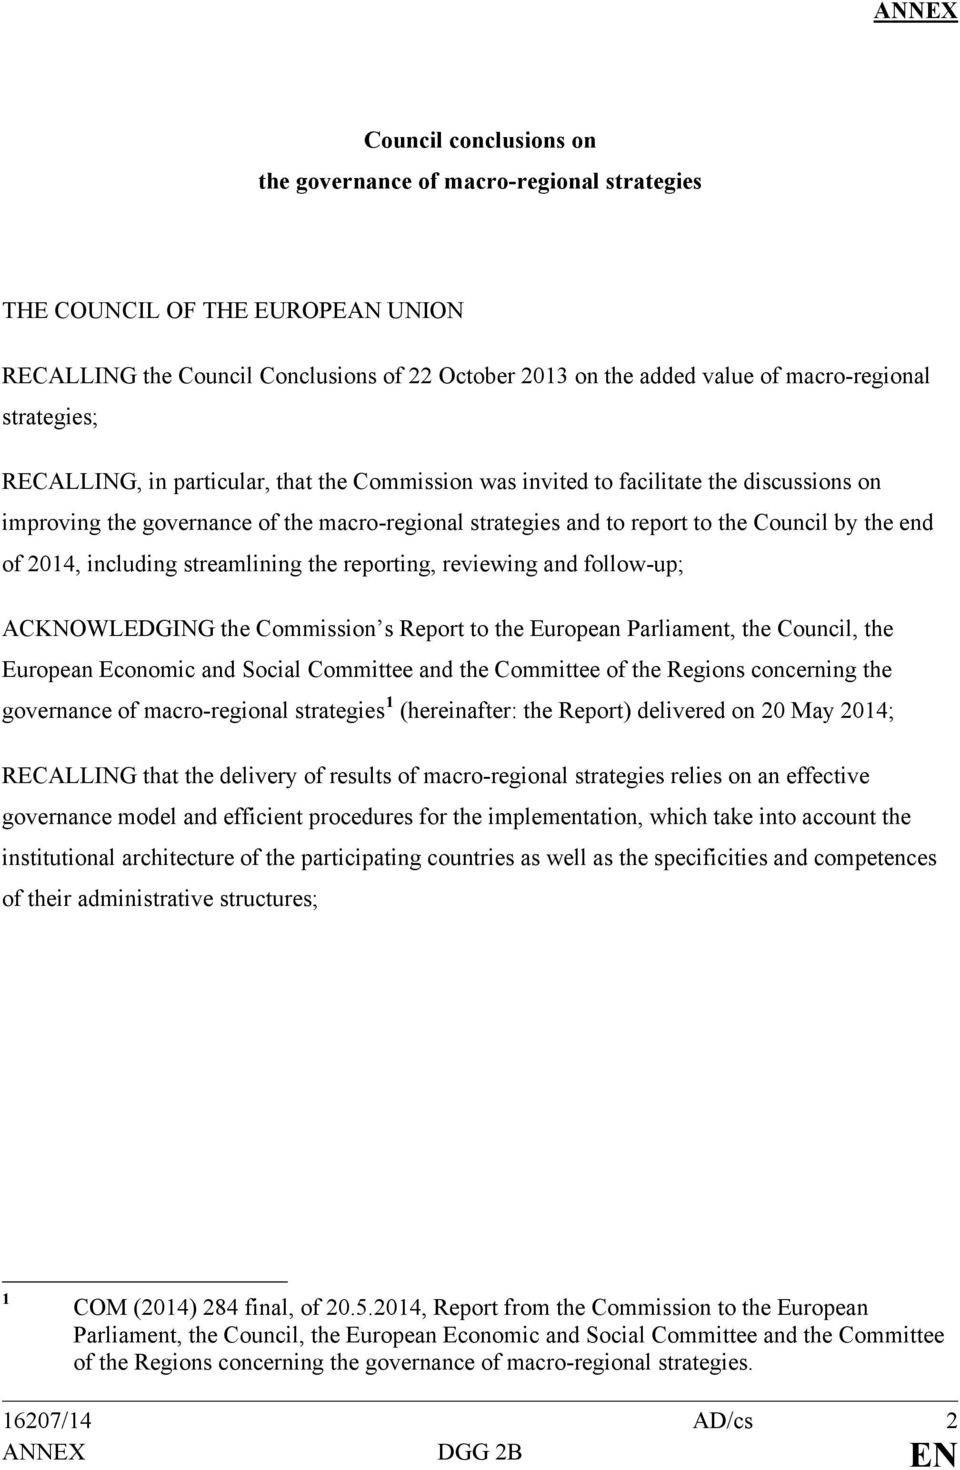 end of 2014, including streamlining the reporting, reviewing and follow-up; ACKNOWLEDGING the Commission s Report to the European Parliament, the Council, the European Economic and Social Committee